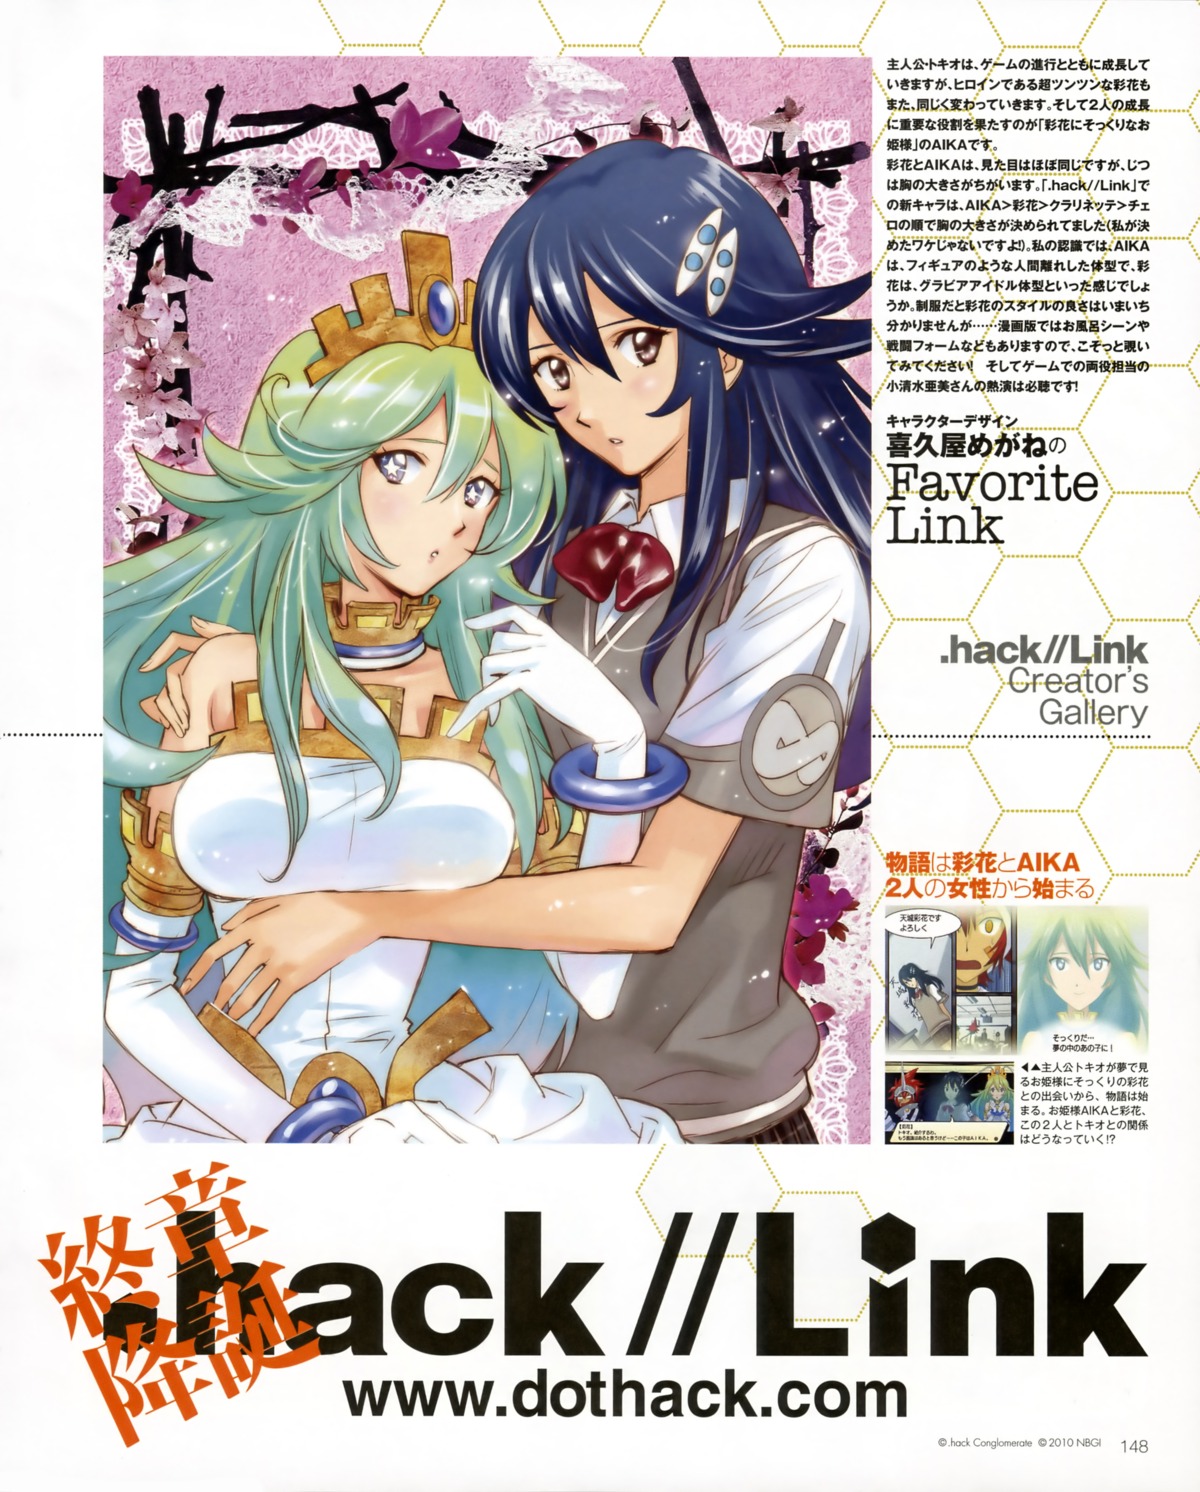 hack//SIGN - Wallpaper and Scan Gallery - Minitokyo